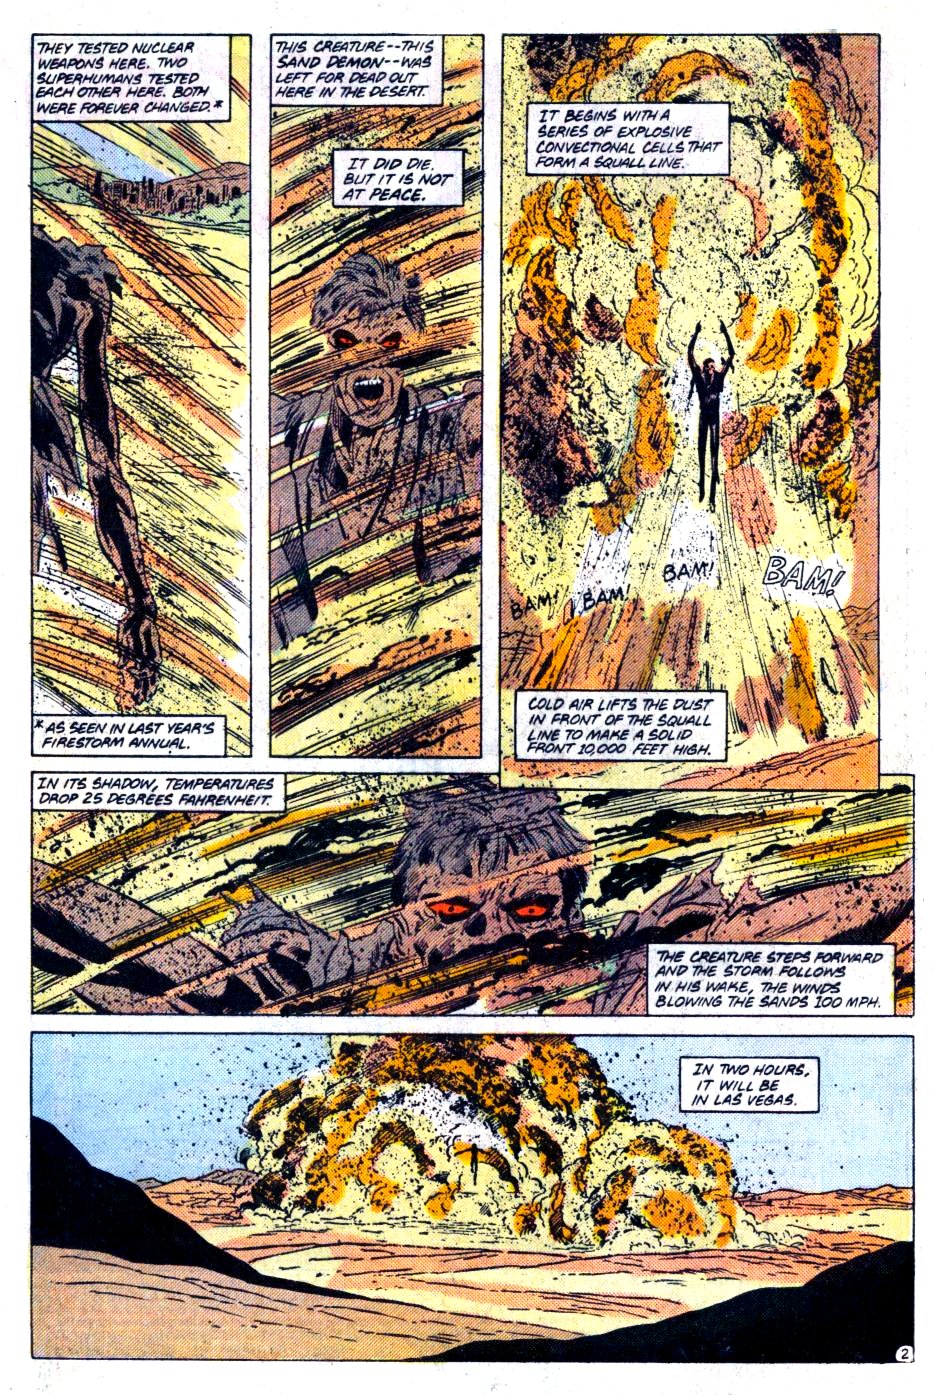 Firestorm, the Nuclear Man Issue #74 #10 - English 3